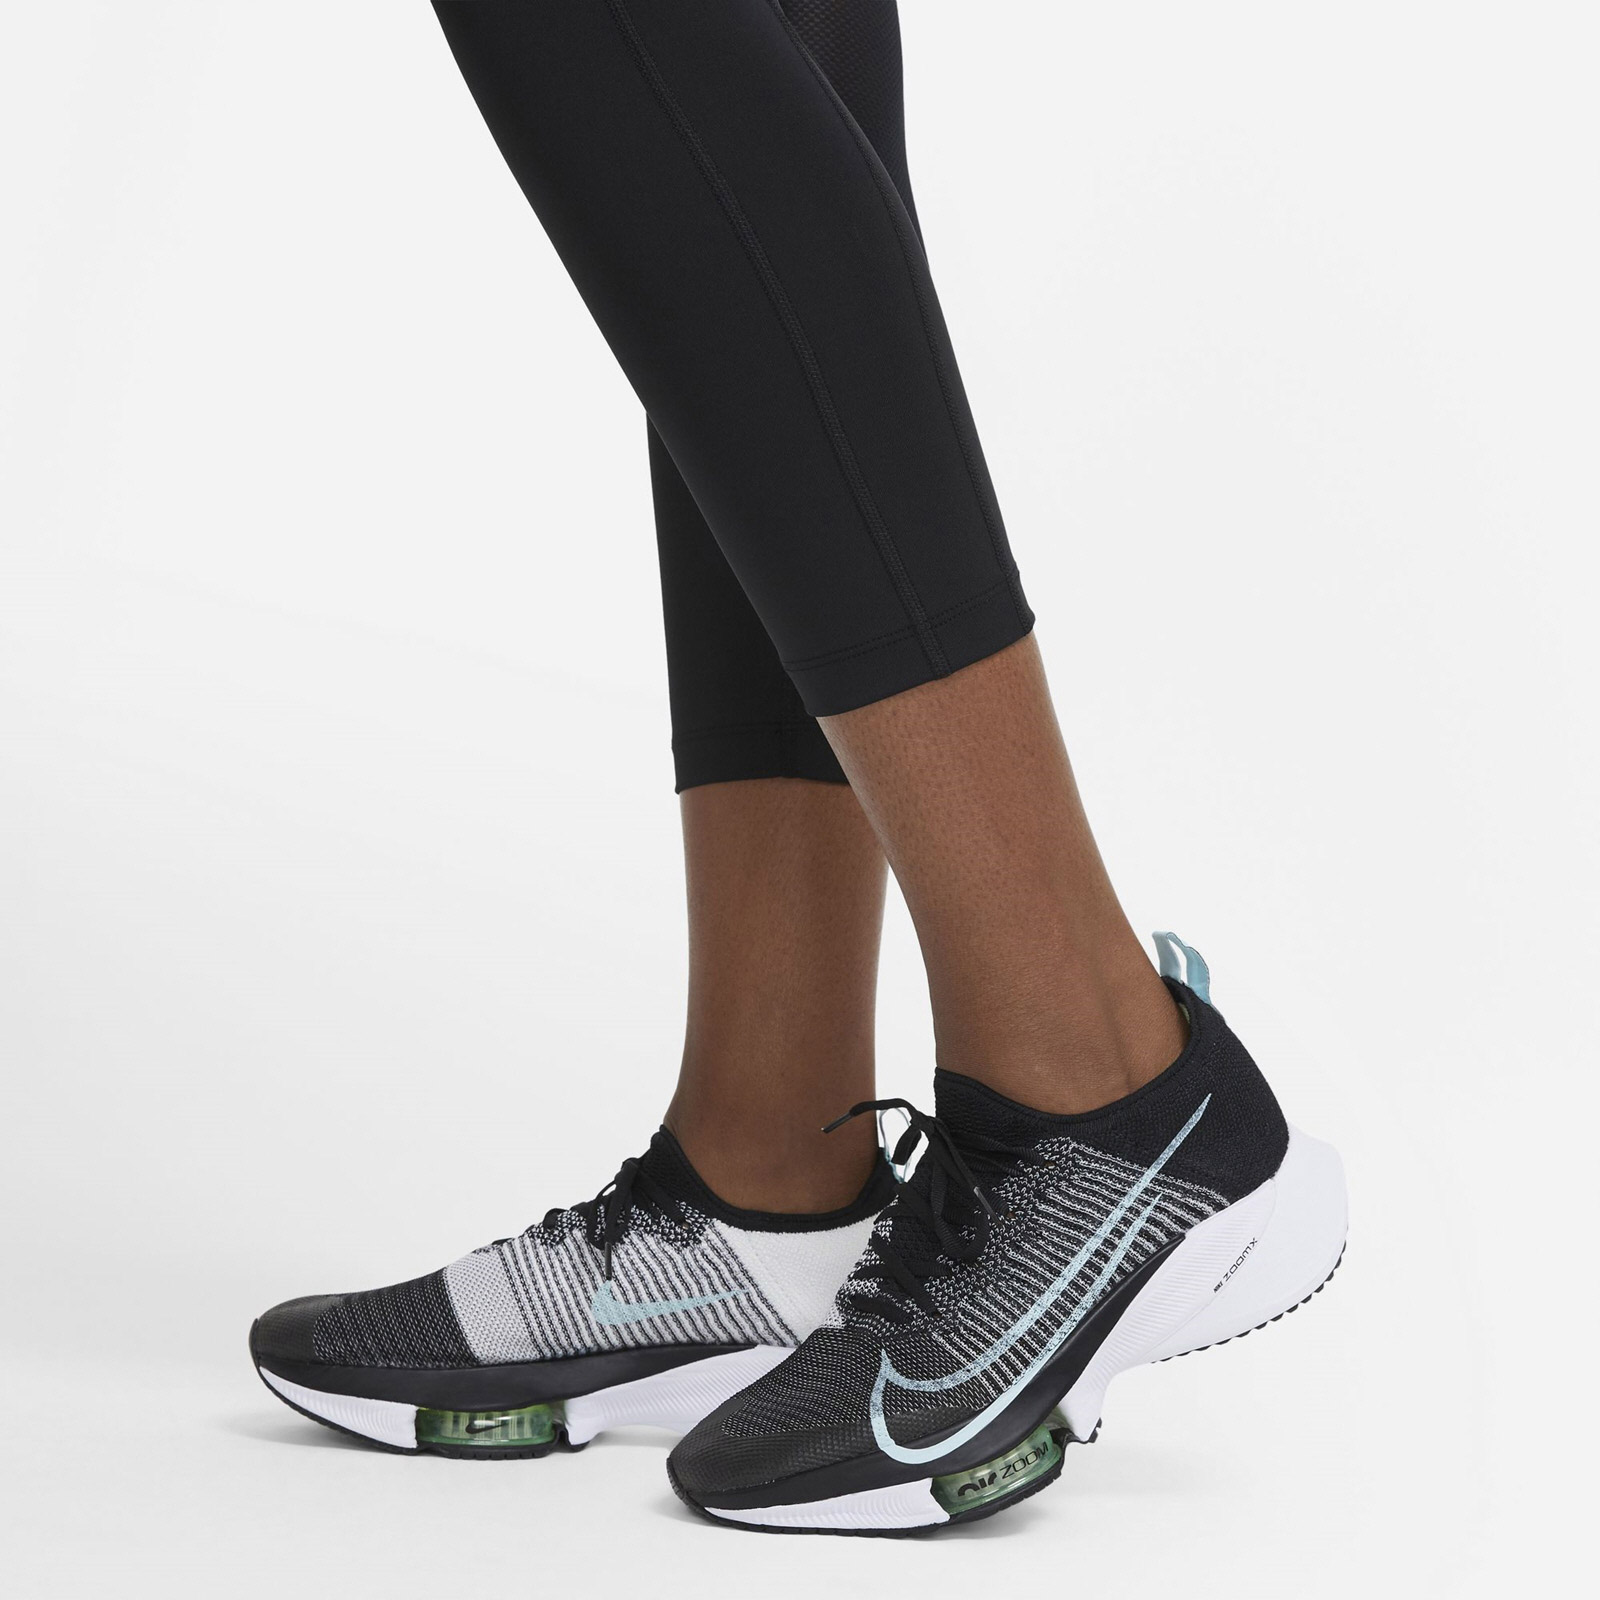 NIKE WOMENS EPIC FAST CROP TIGHTS